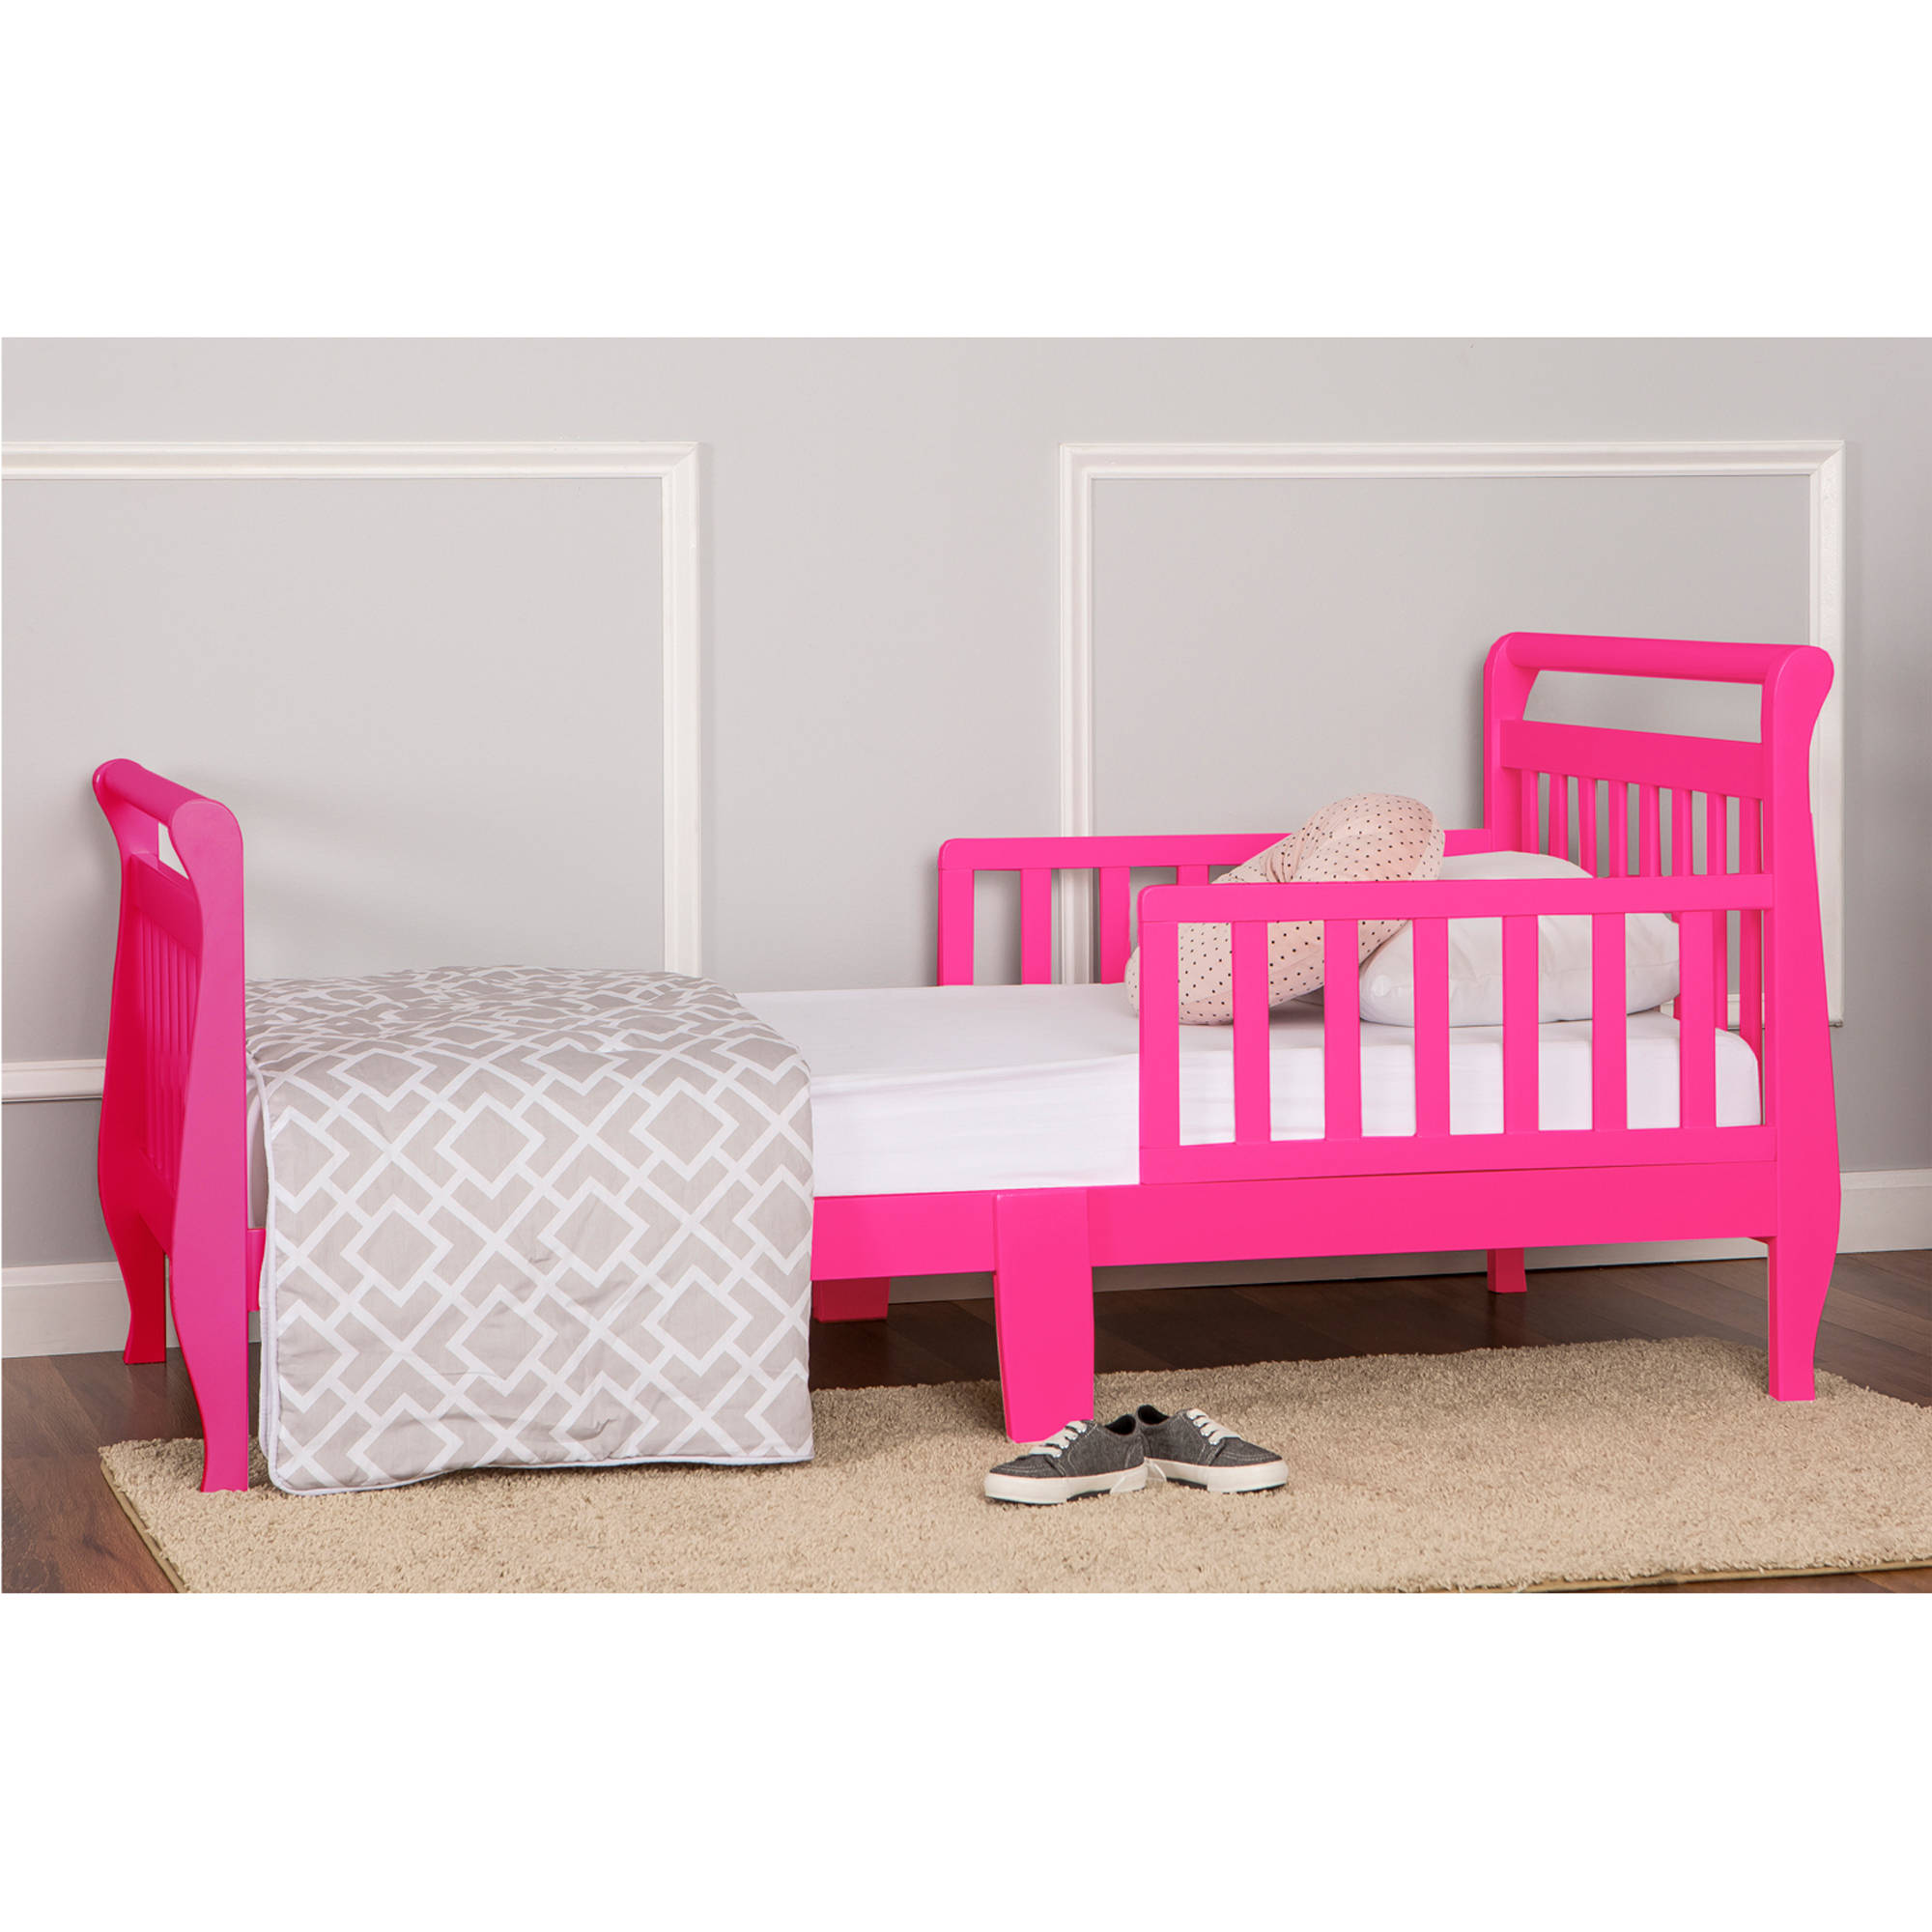 Dream On Me Sleigh Toddler Bed, Fuschia Pink - image 2 of 3